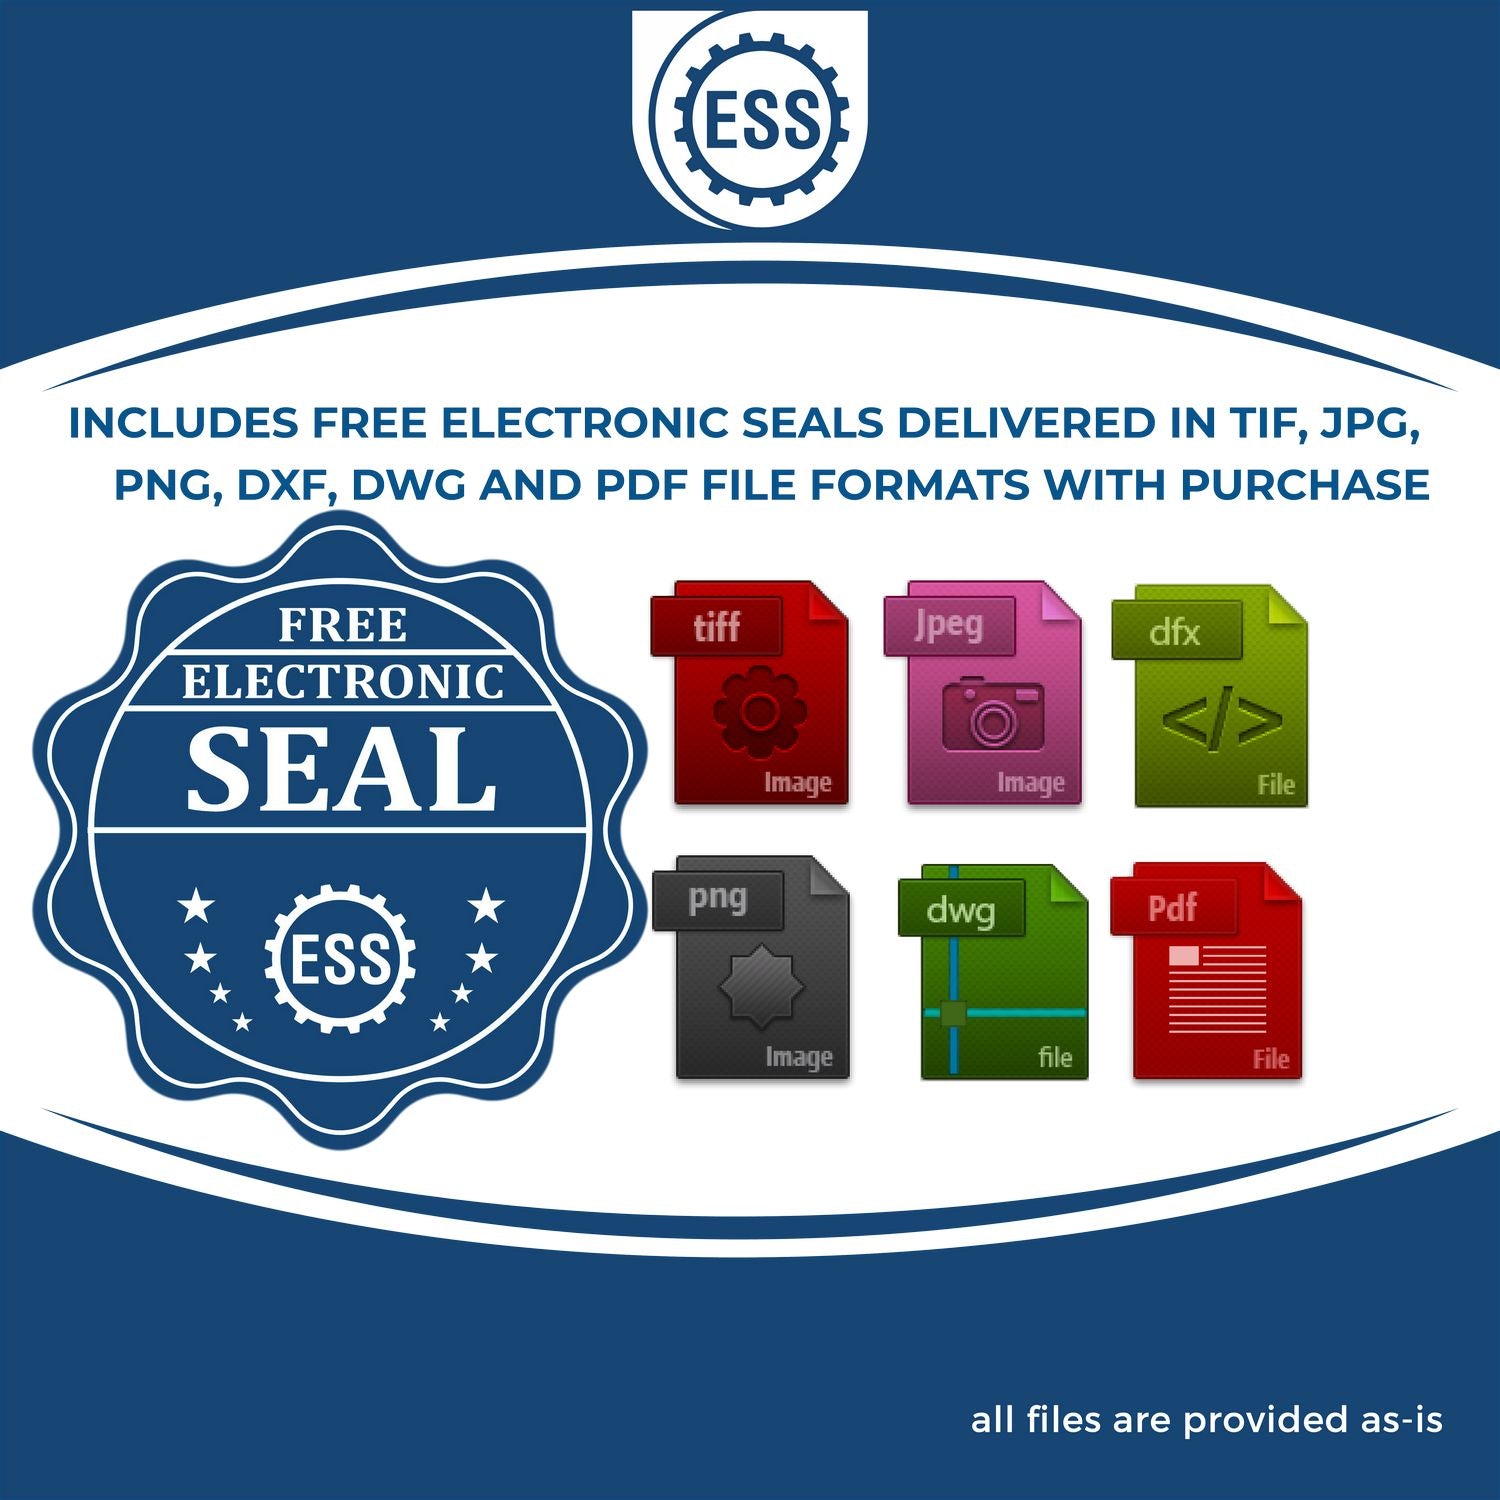 An infographic for the free electronic seal for the Hybrid Arkansas Land Surveyor Seal illustrating the different file type icons such as DXF, DWG, TIF, JPG and PNG.